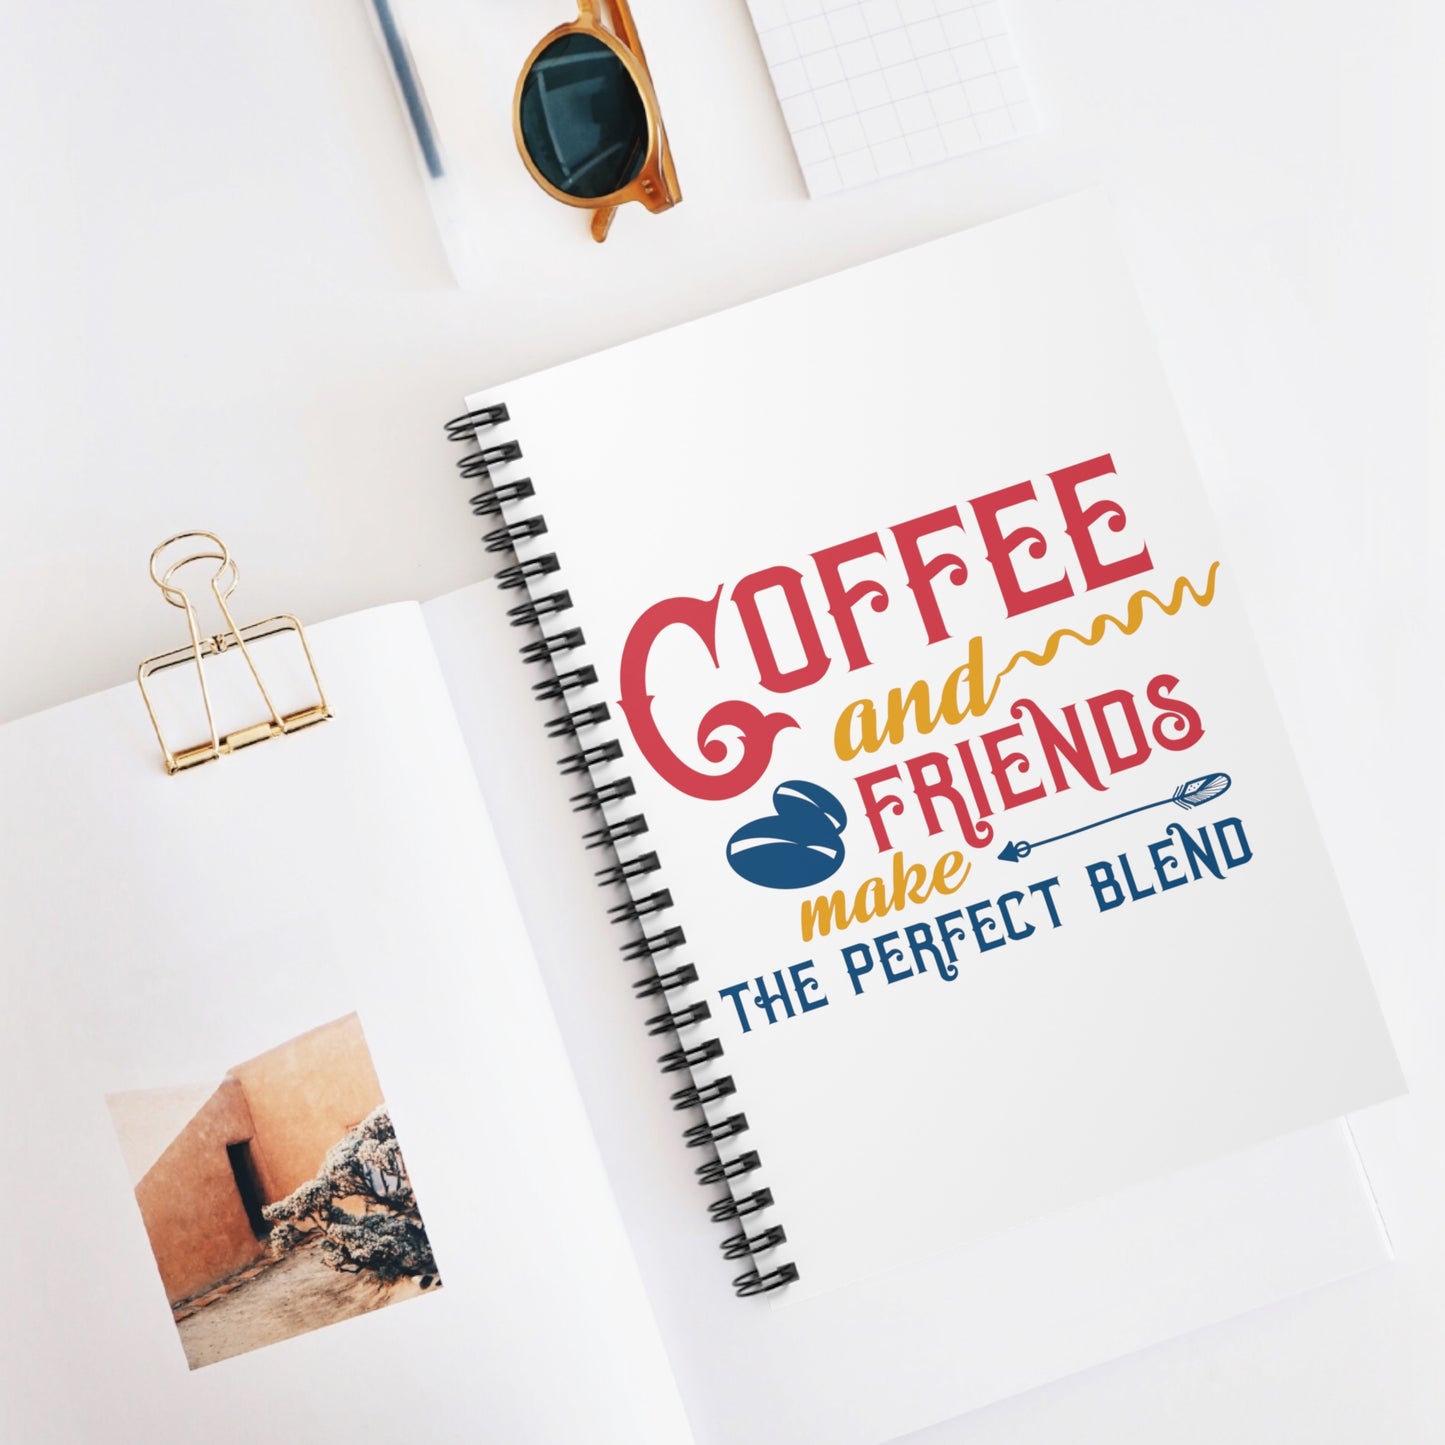 Coffee and Friends: Spiral Notebook - Log Books - Journals - Diaries - and More Custom Printed by TheGlassyLass